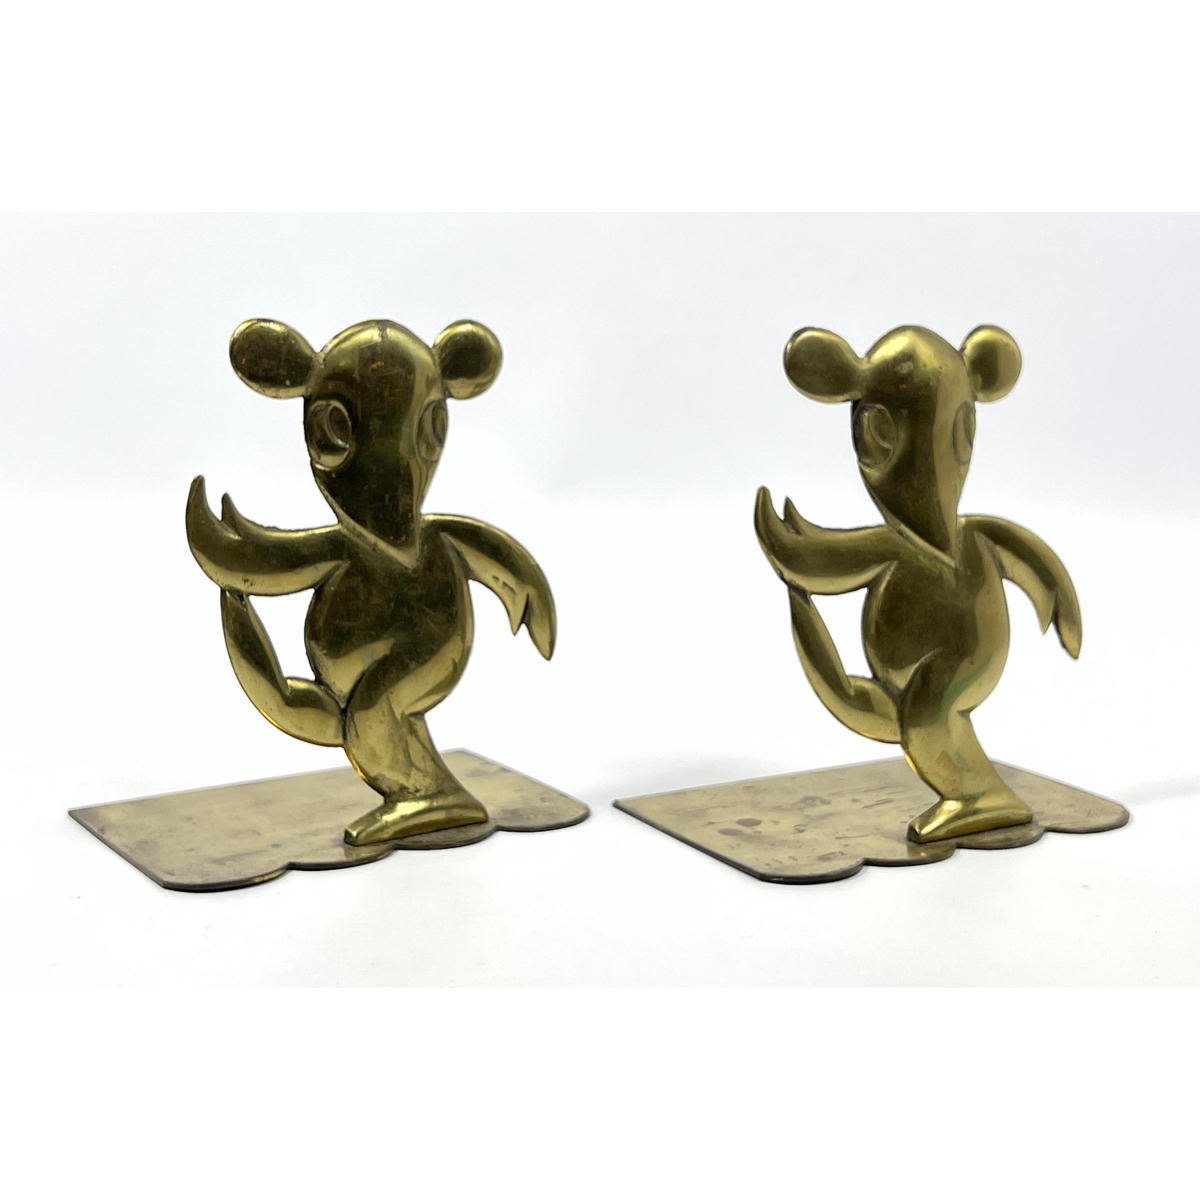 Attributed to Hagenauer brass bookends